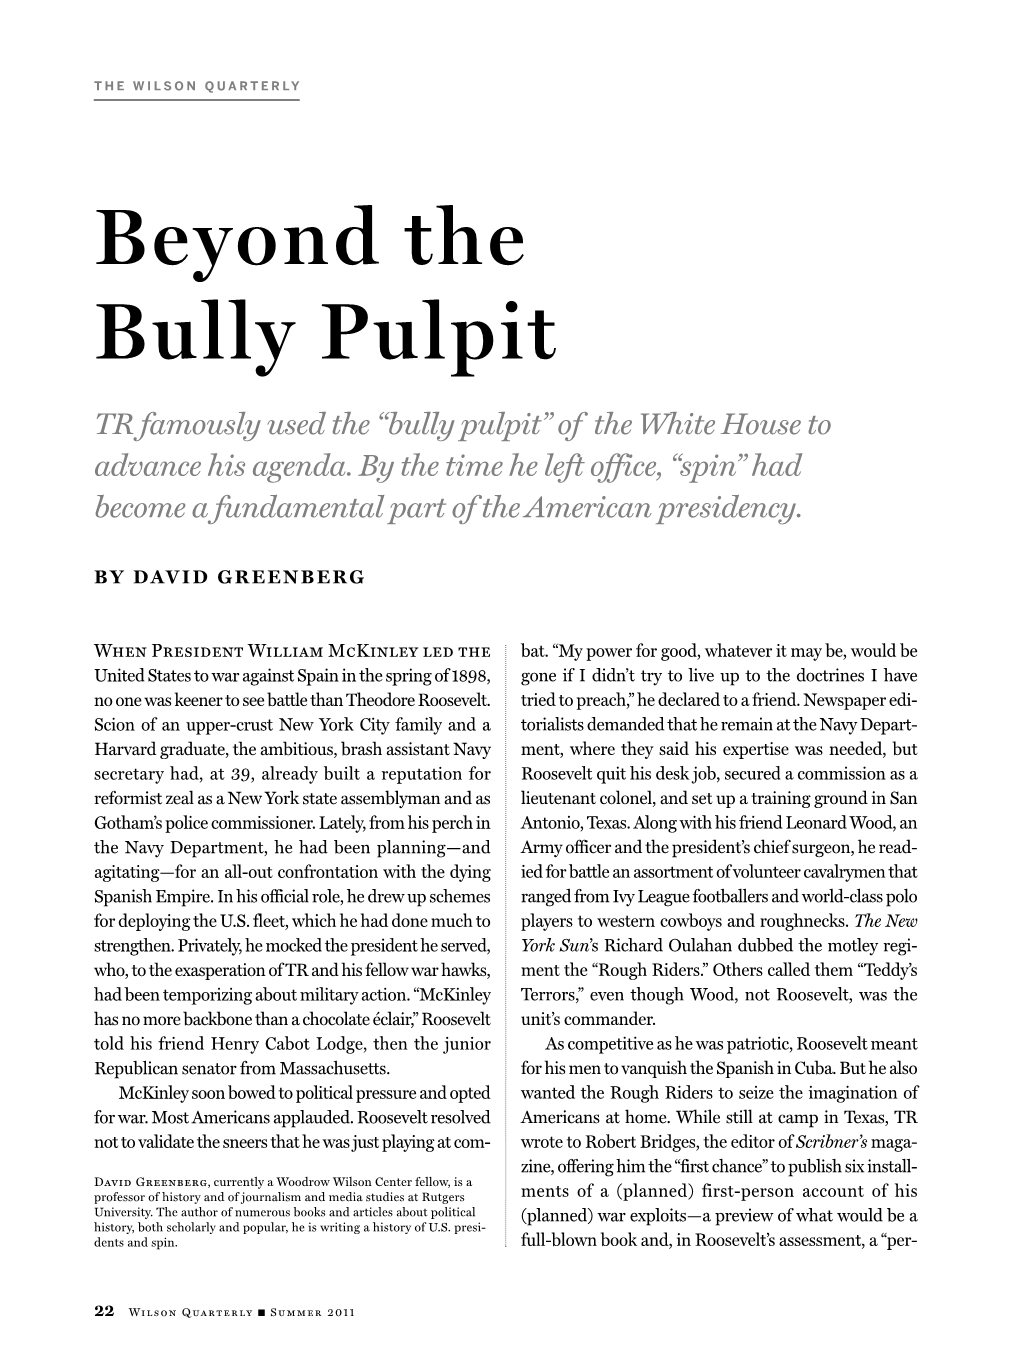 Beyond the Bully Pulpit